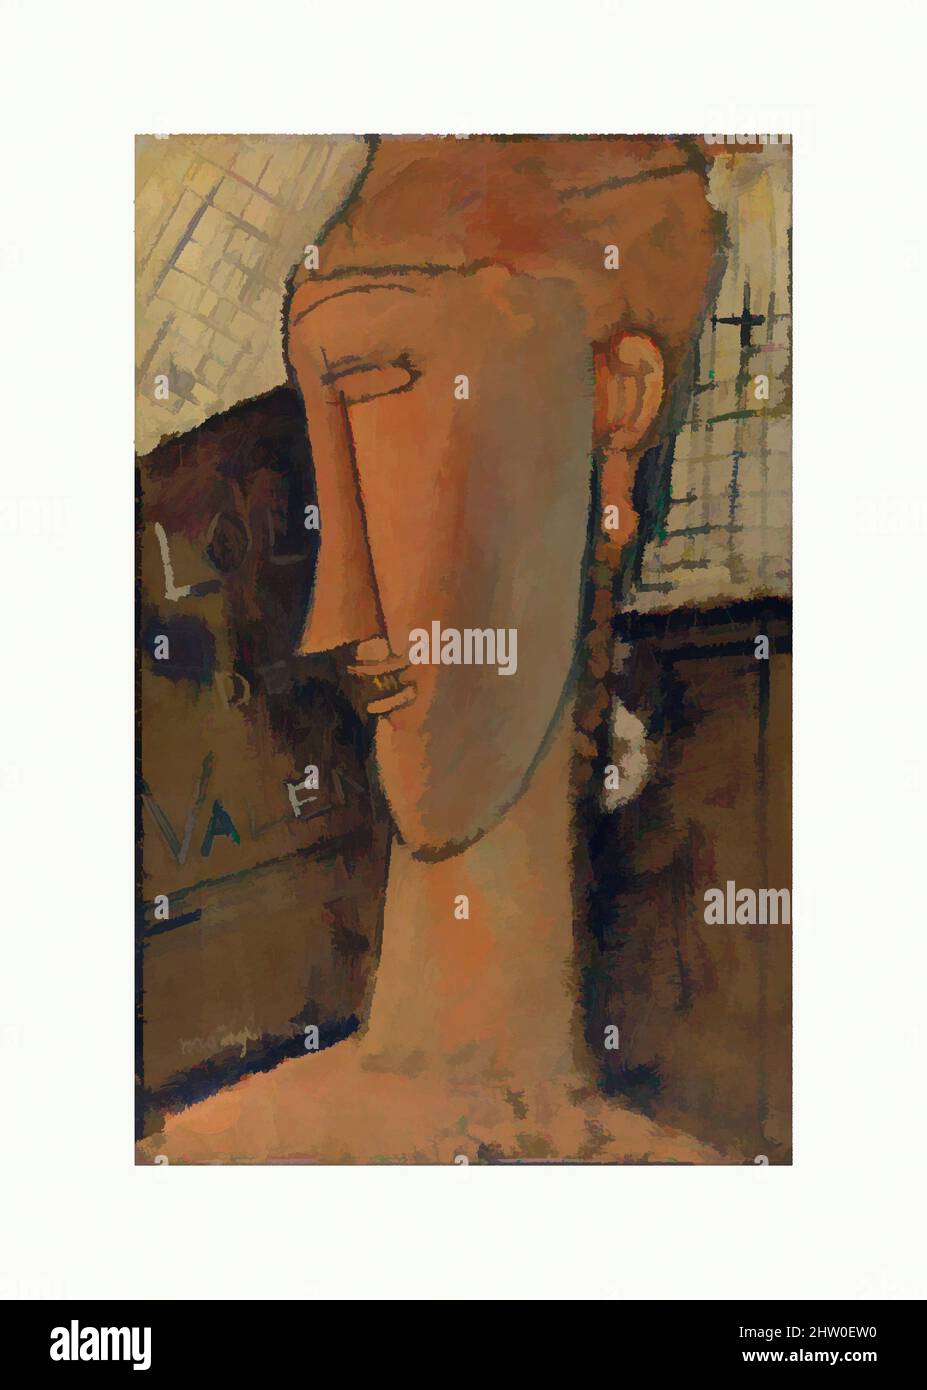 Art inspired by Lola de Valence, 1915, Oil on paper, mounted on wood, H. 20 1/2 × W. 13 1/4 in. (52.1 × 33.7 cm), Paintings, Amedeo Modigliani (Italian, Livorno 1884–1920 Paris), Modigliani consistently integrated stylistic features of African art into his distinctive portraits. This, Classic works modernized by Artotop with a splash of modernity. Shapes, color and value, eye-catching visual impact on art. Emotions through freedom of artworks in a contemporary way. A timeless message pursuing a wildly creative new direction. Artists turning to the digital medium and creating the Artotop NFT Stock Photo